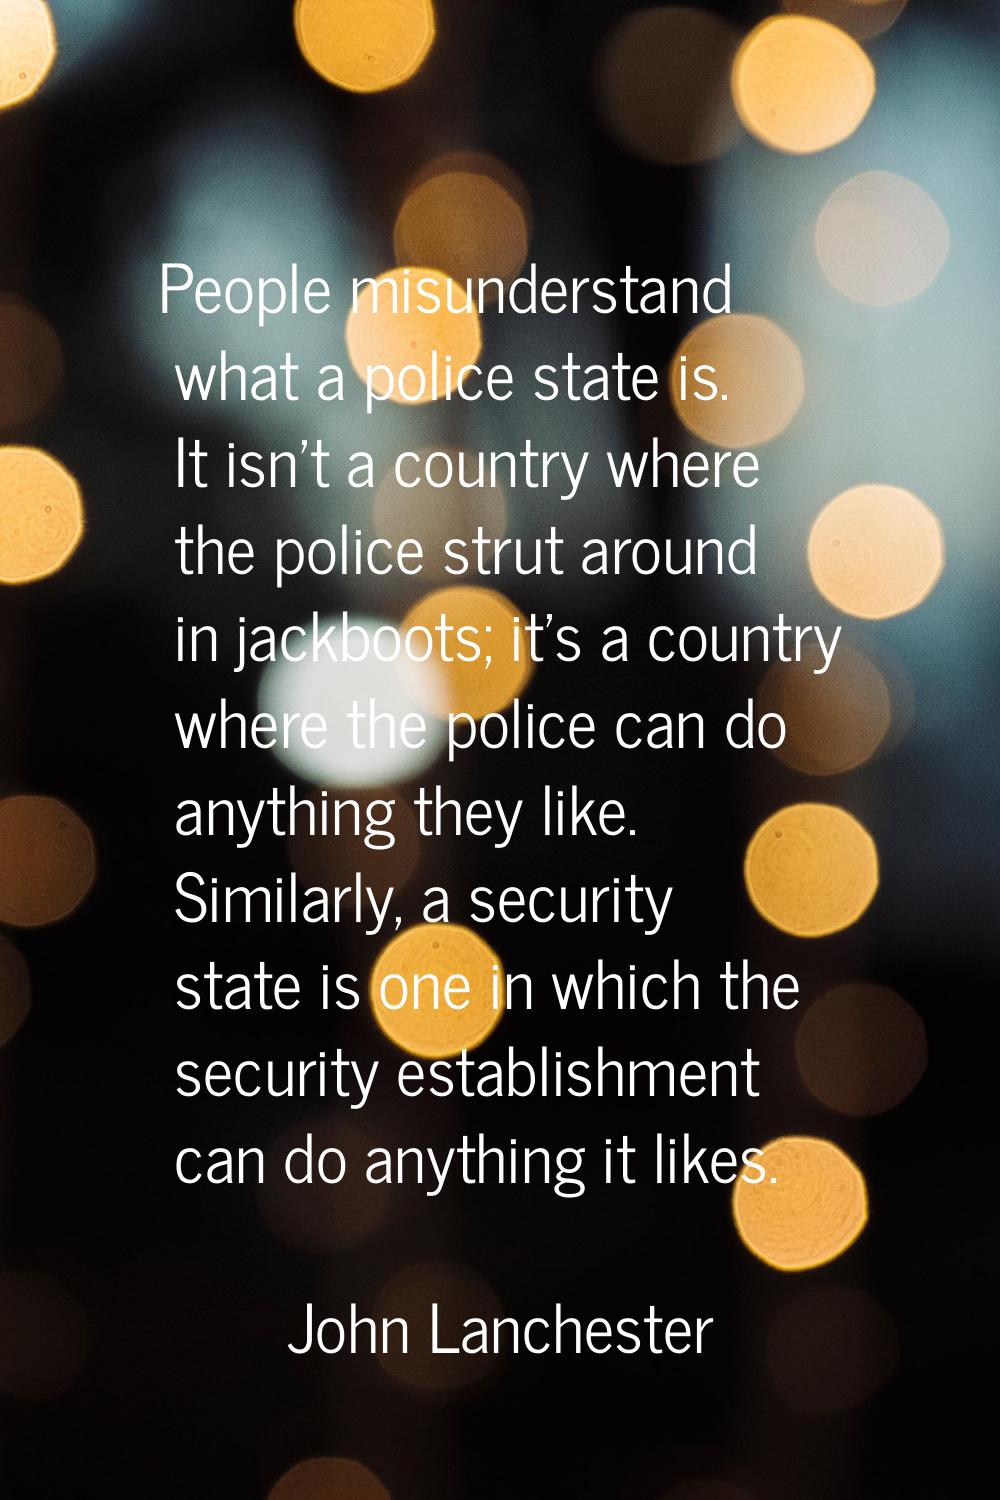 People misunderstand what a police state is. It isn't a country where the police strut around in ja